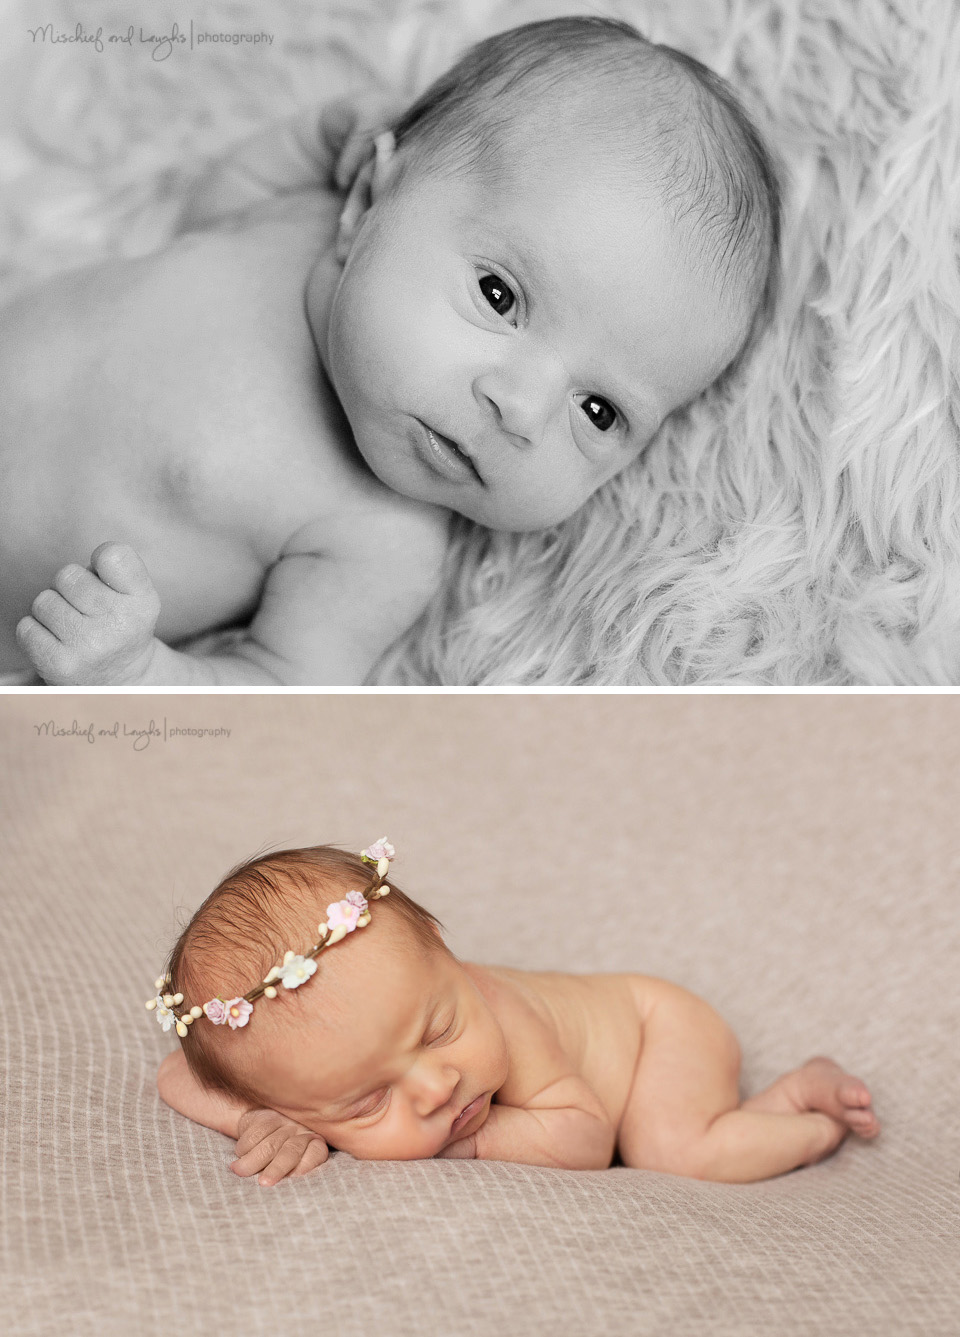 Newborn Photography. Mischief and Laughs Photography, Cincinnati OH